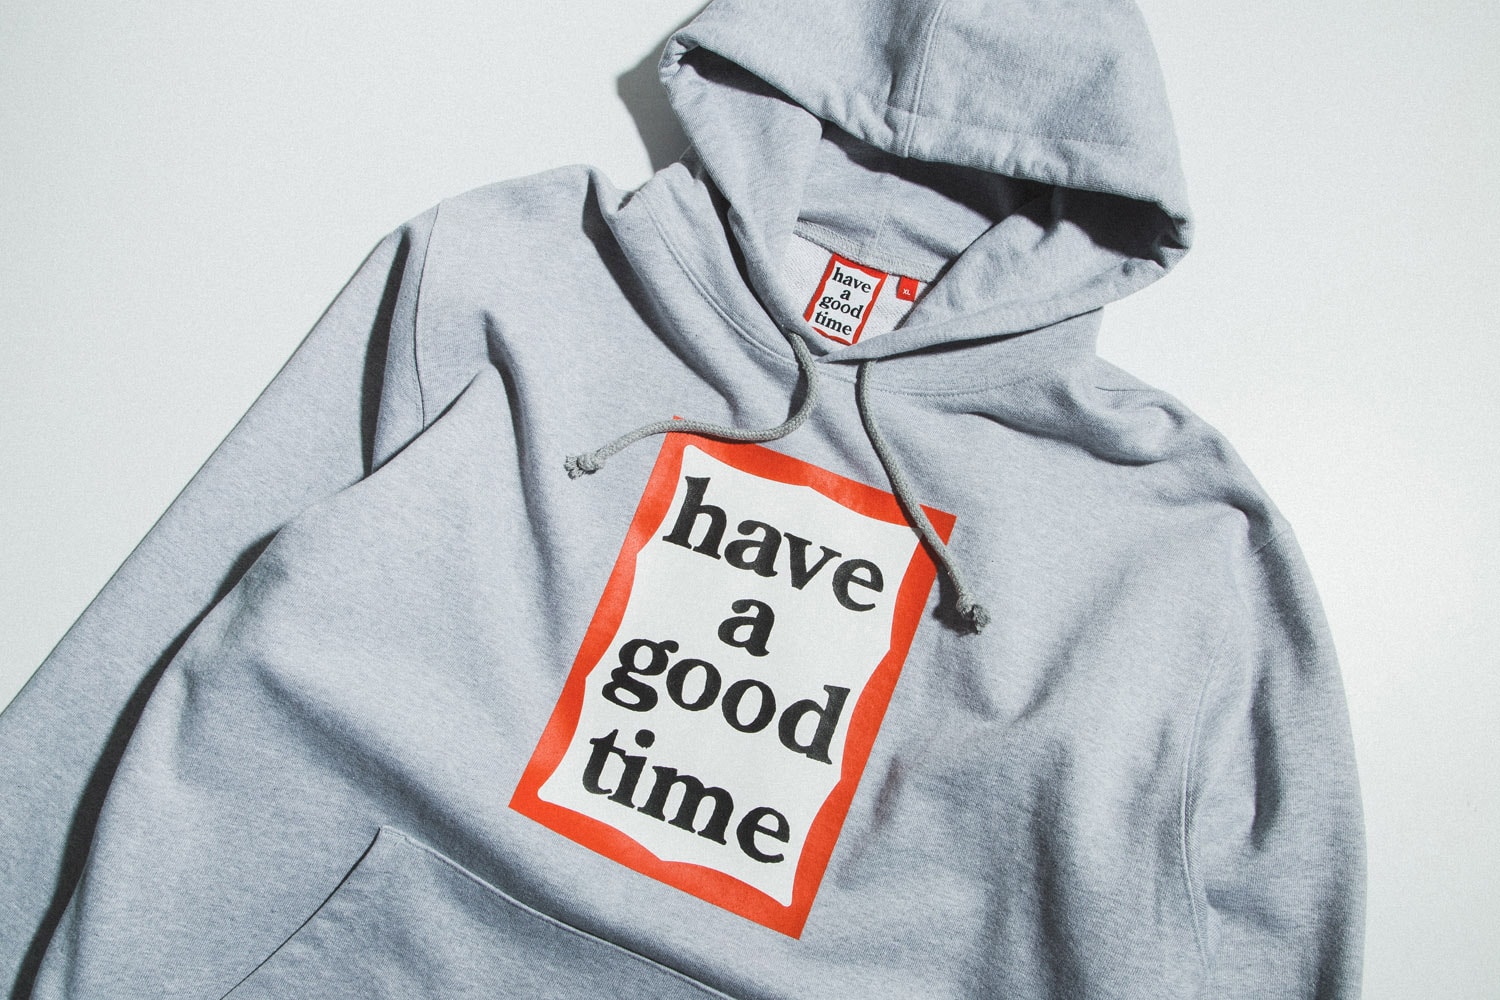 Have a Good Time spring summer 2018 drop release hbx collection sweater hoodie tote bag pin